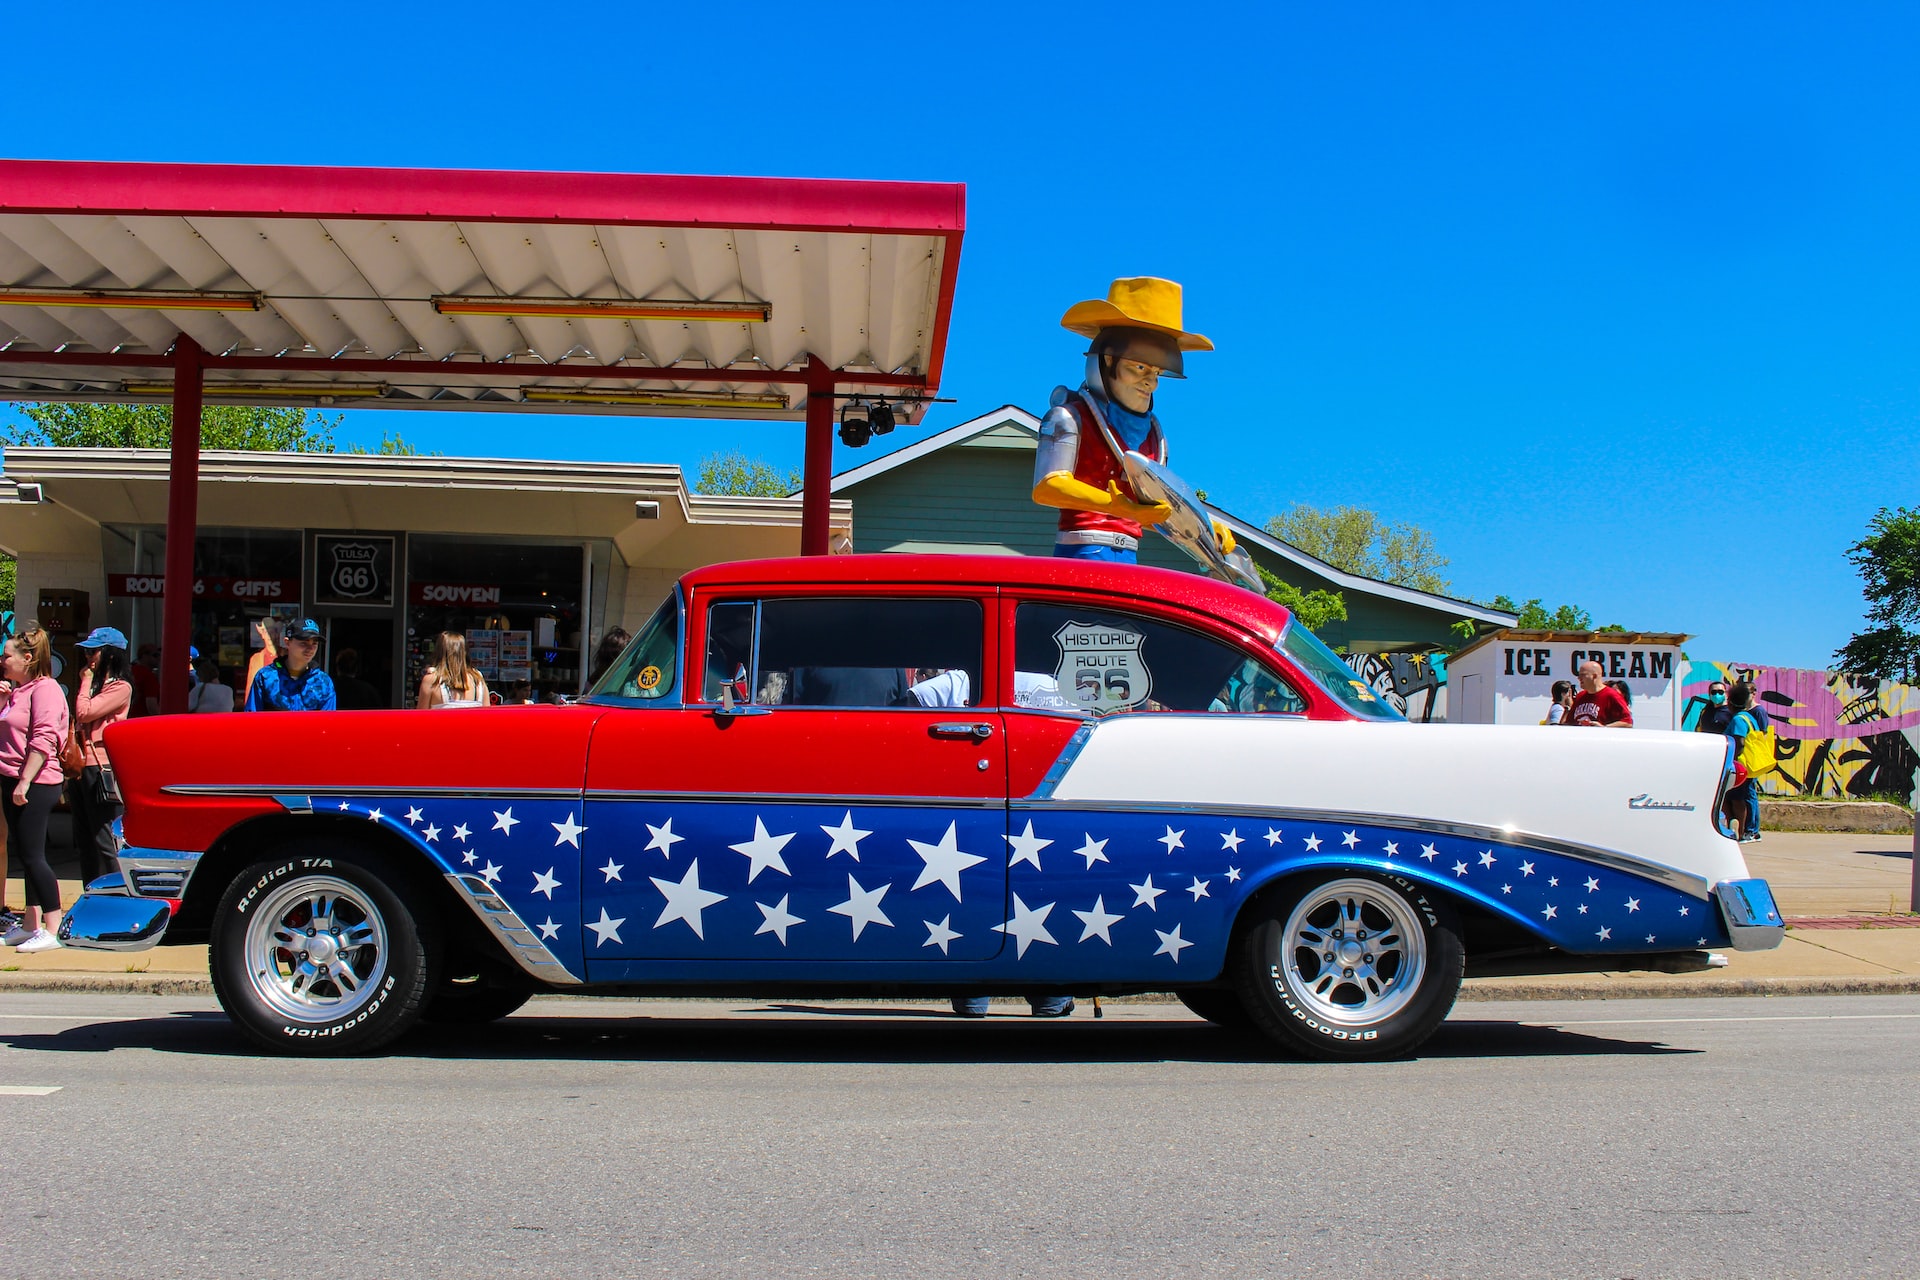 The Ultimate American Road Trip Travel Guide